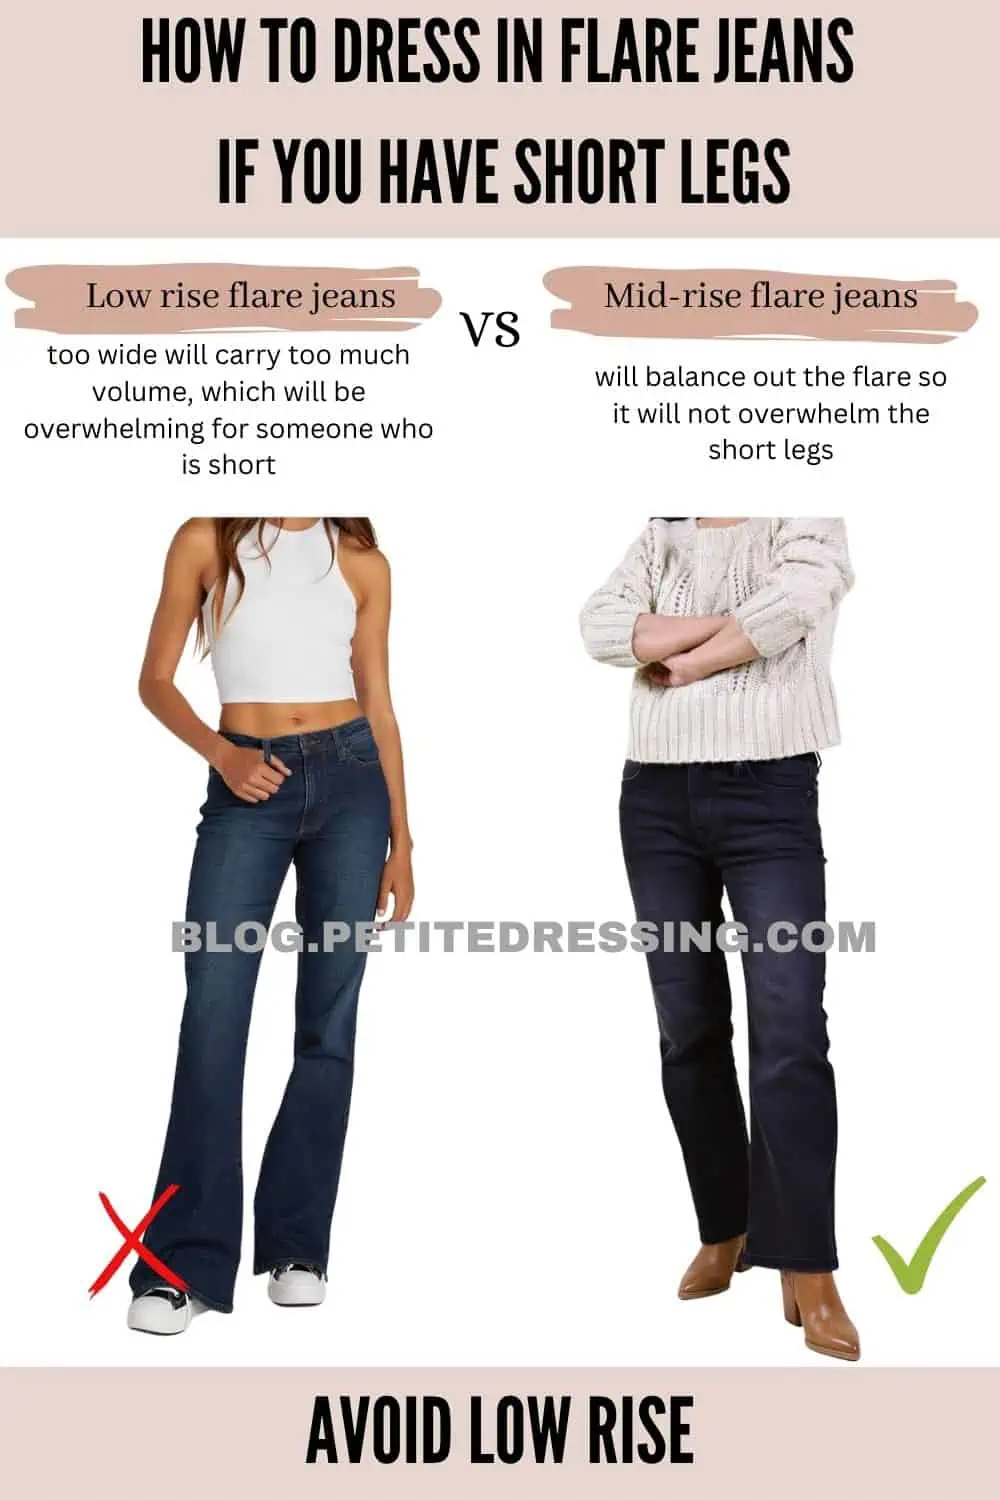 7 Tips to Wearing Flare Jeans if you have short legs - Petite Dressing